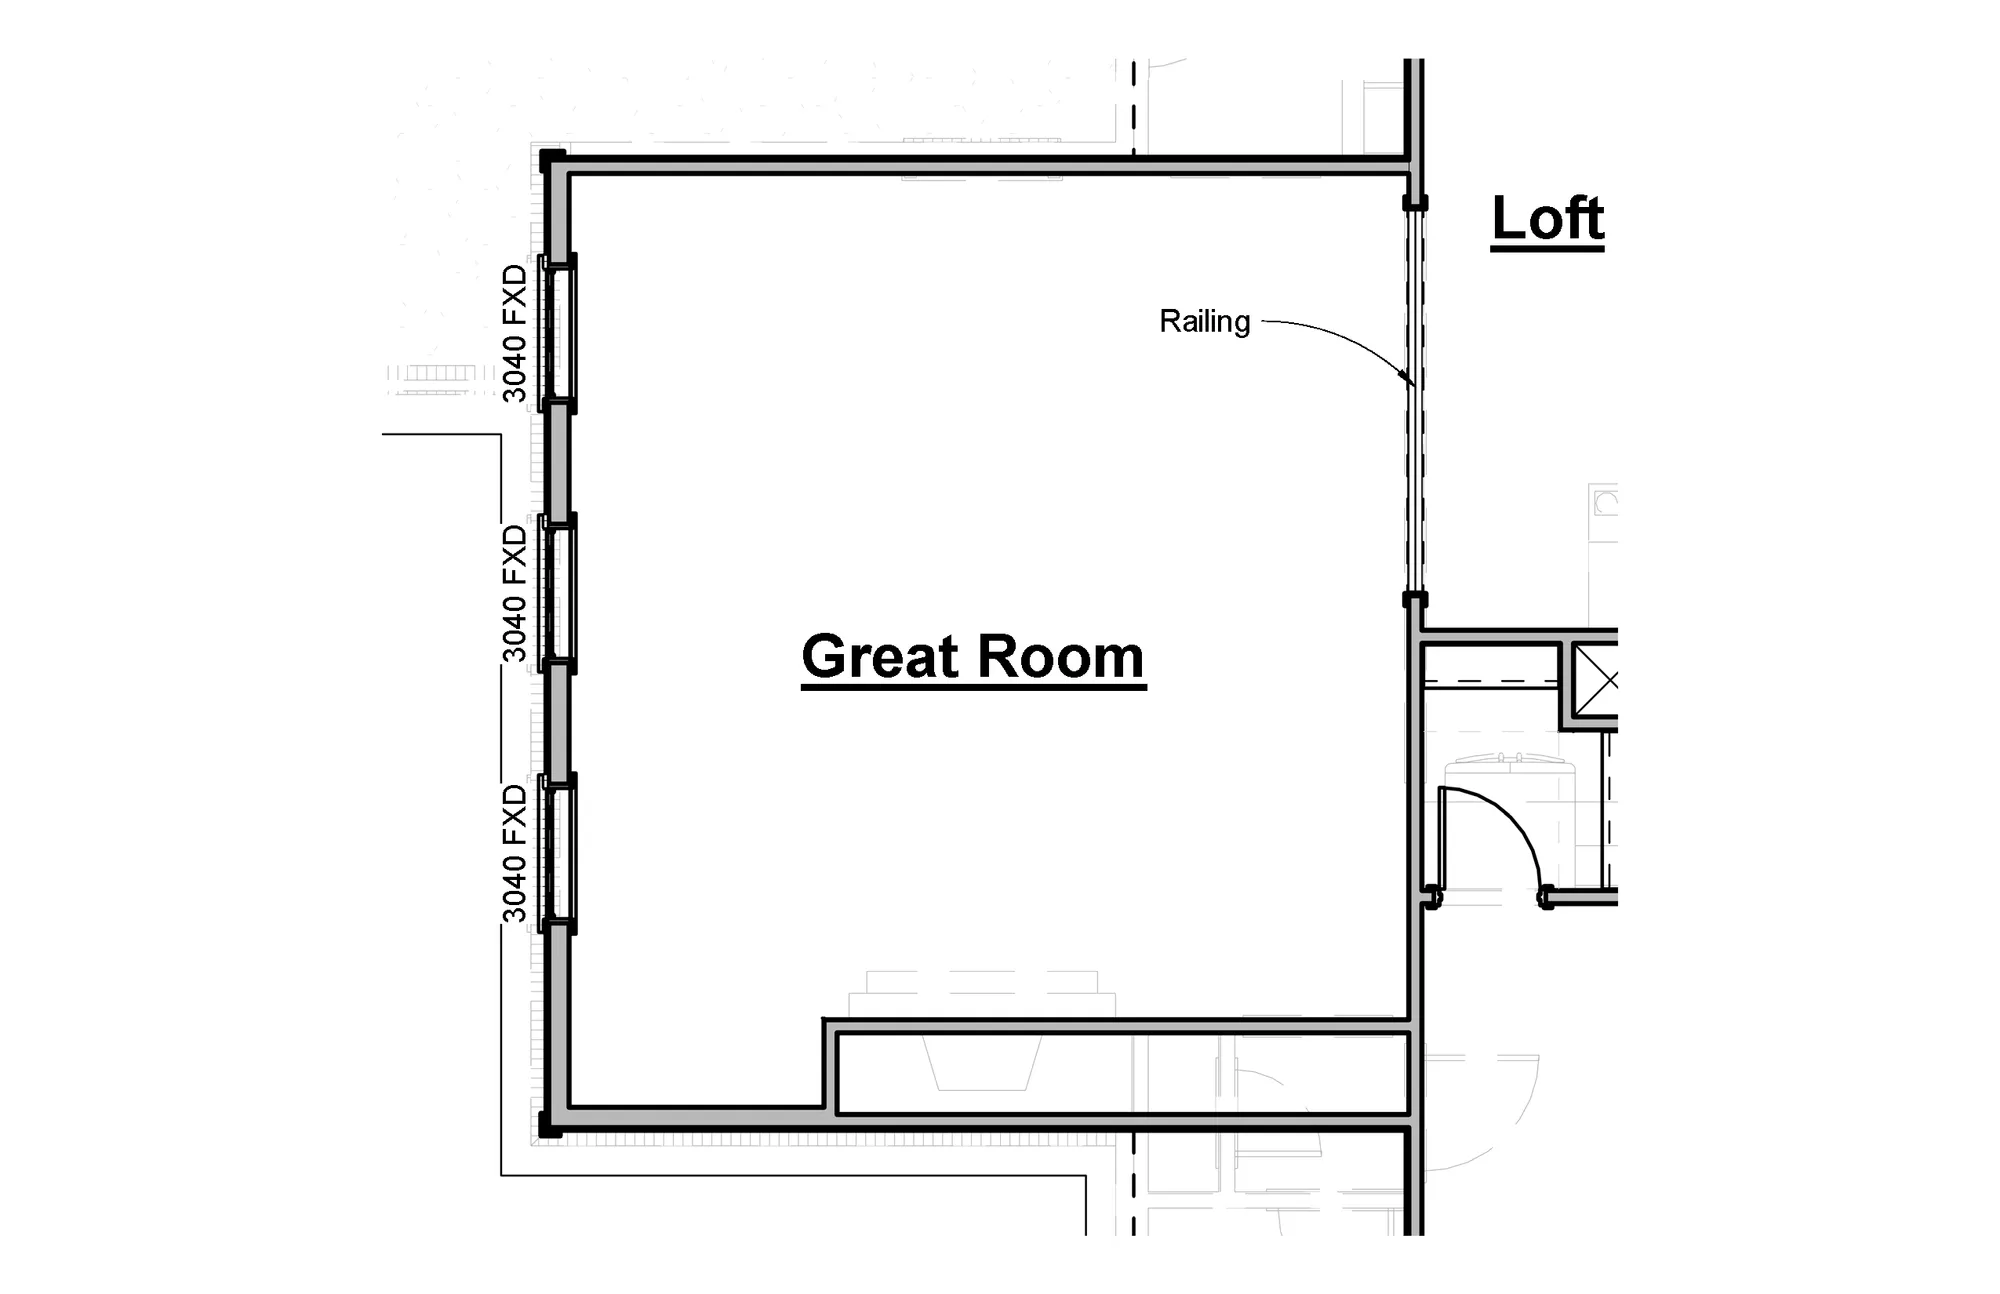 2 Story Great Room Option - undefined